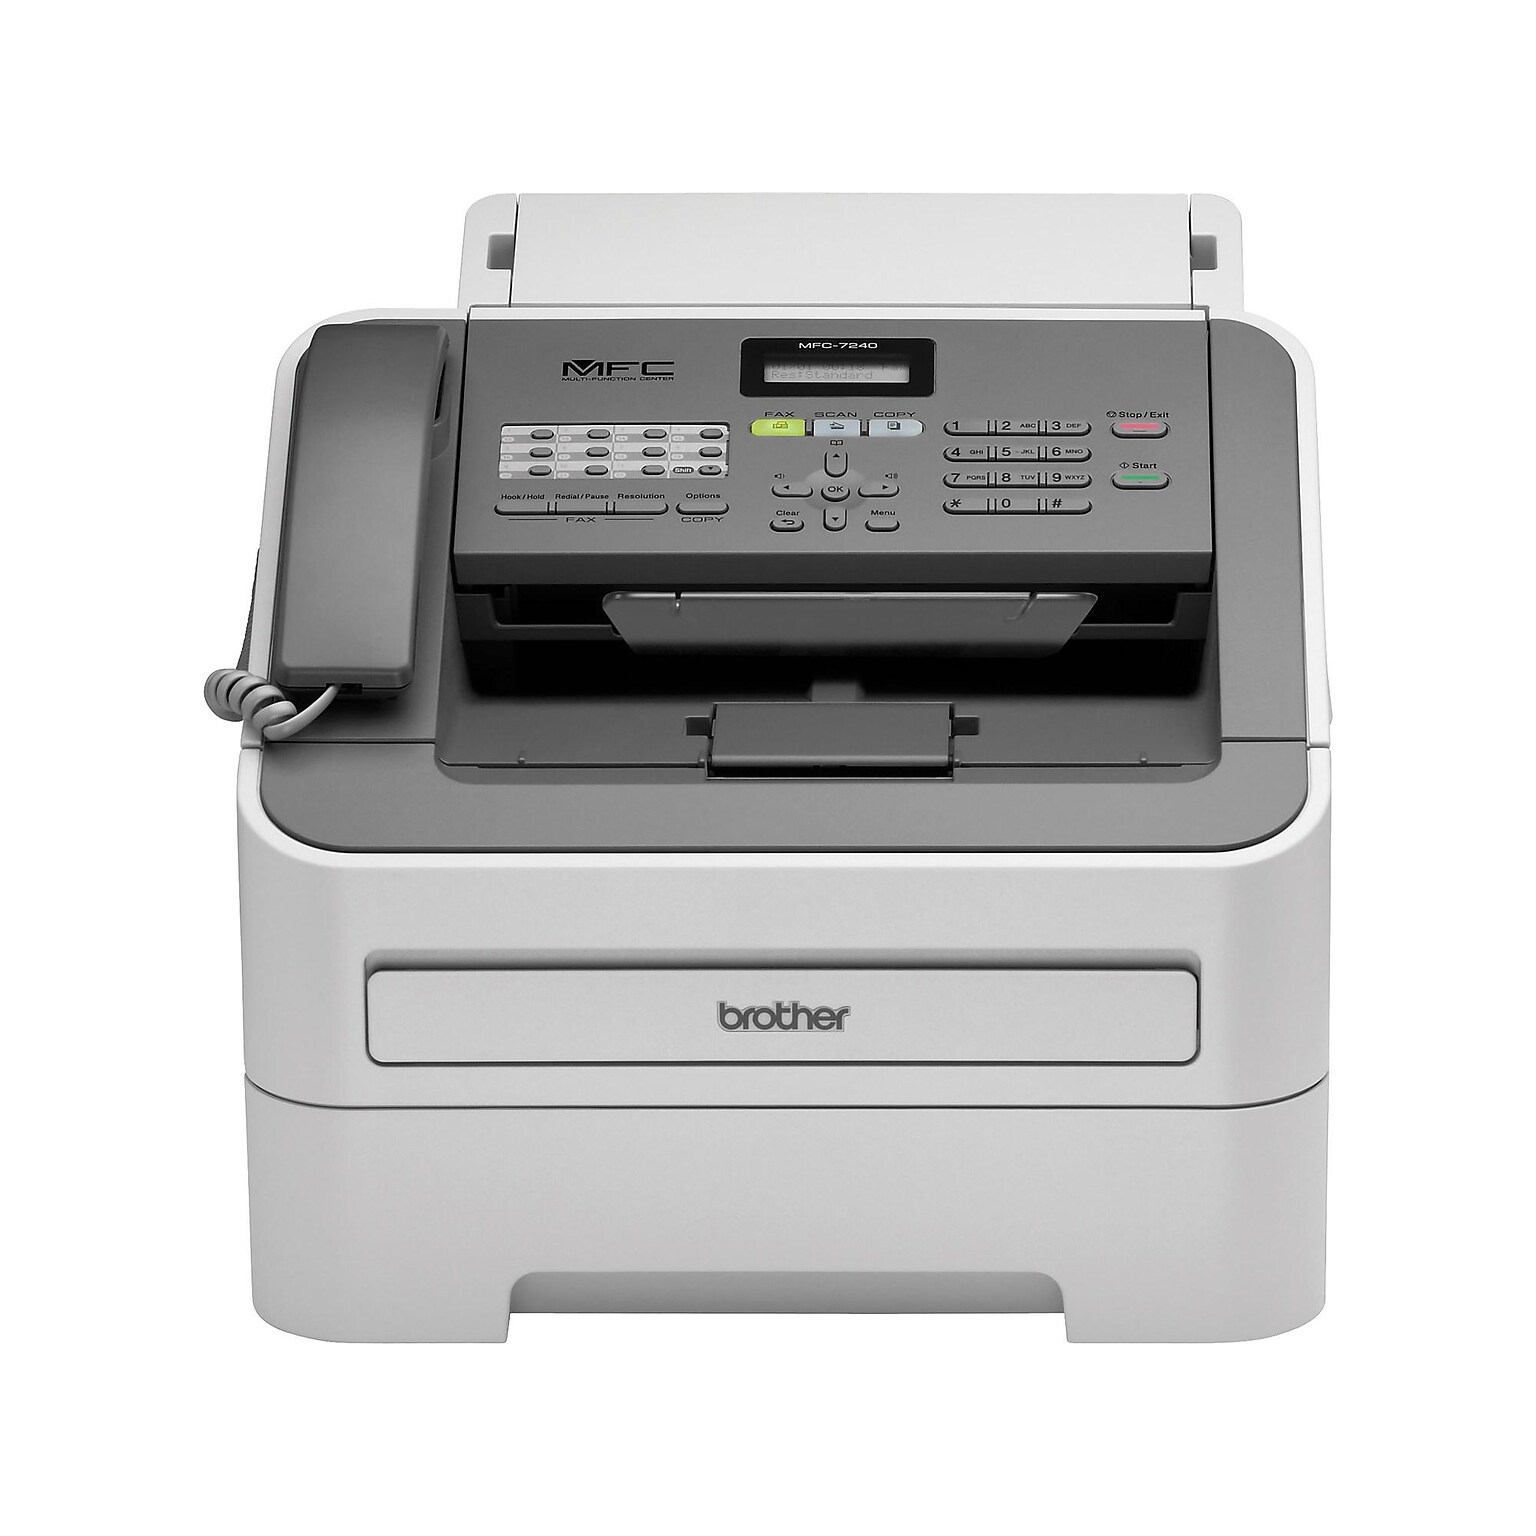 Brother MFC-7240 USB Black & White Compact Laser All-In-One Printer